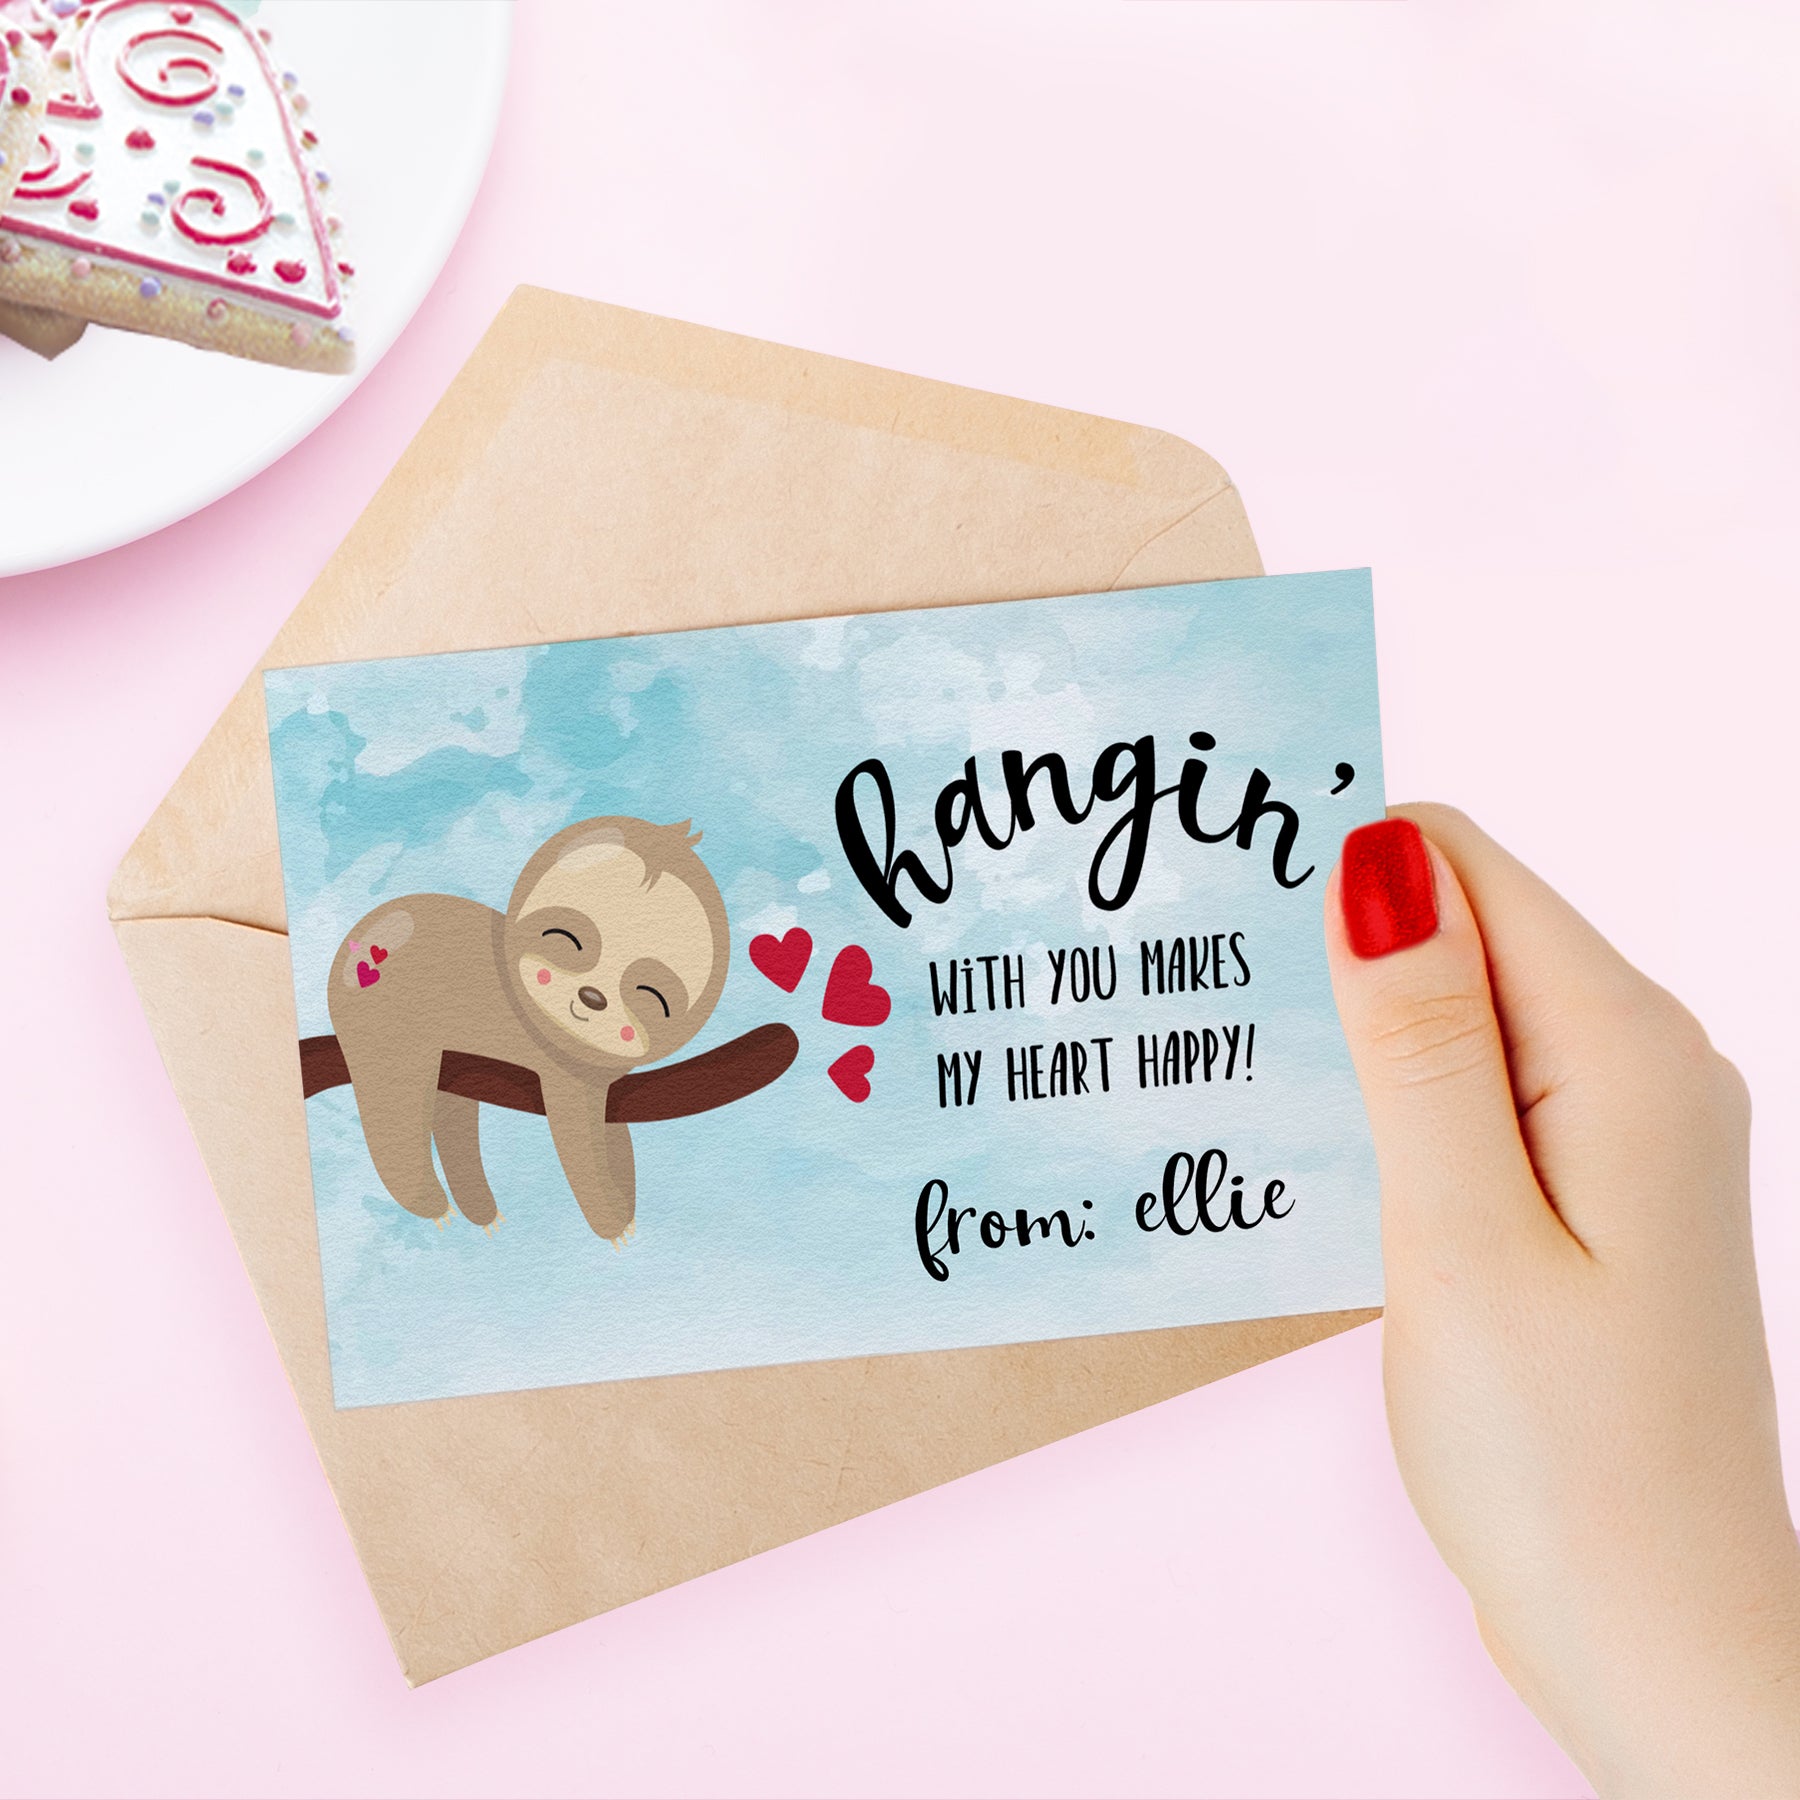 printable sloth cards for Valentine's Day, editable sloth valentine card for school party, gifts for kids, gift ideas for valentine school party